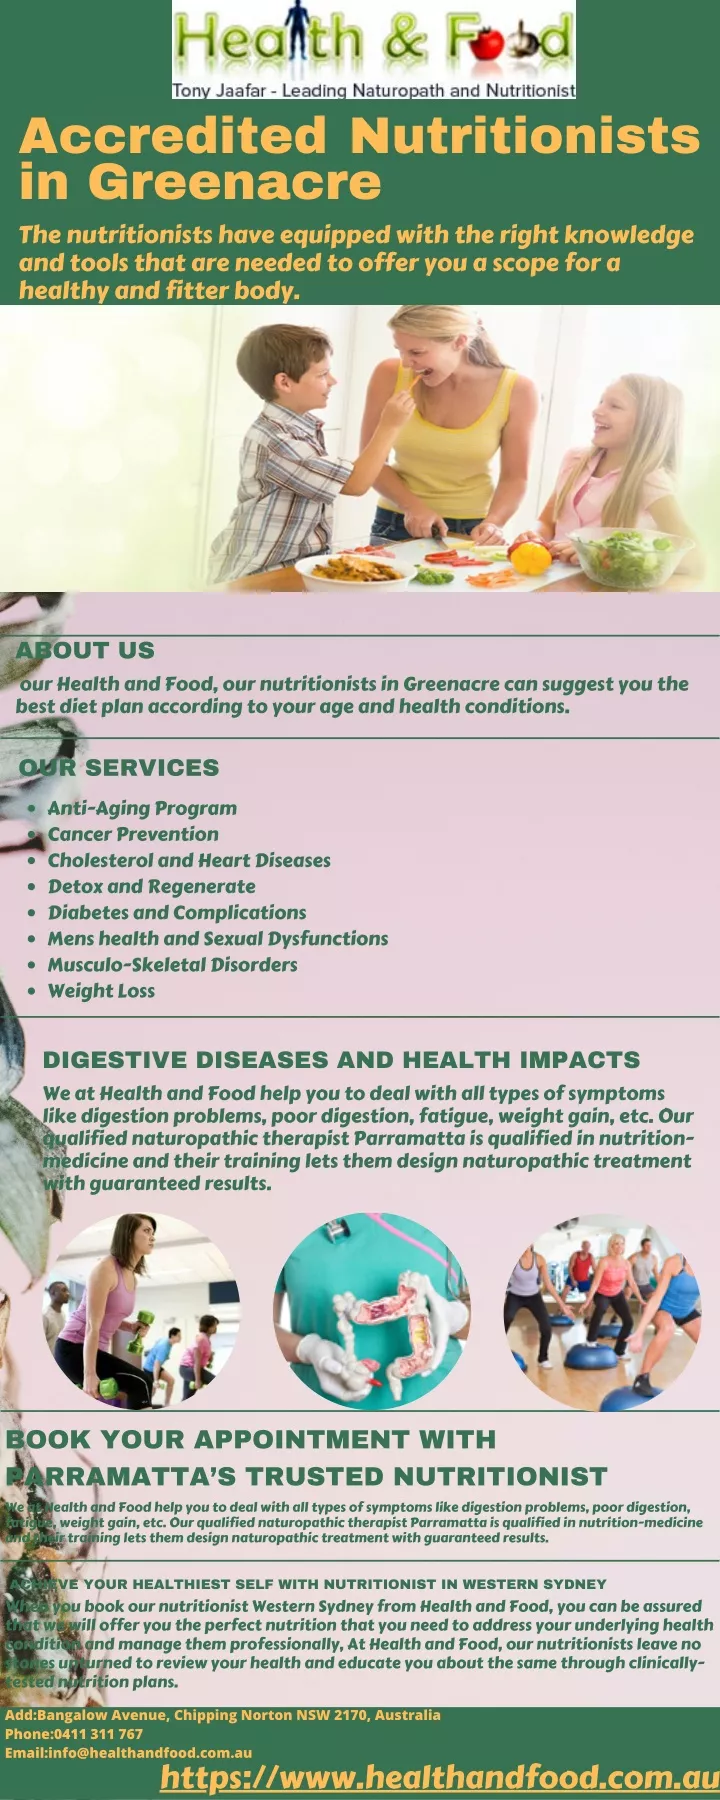 accredited nutritionists in greenacre